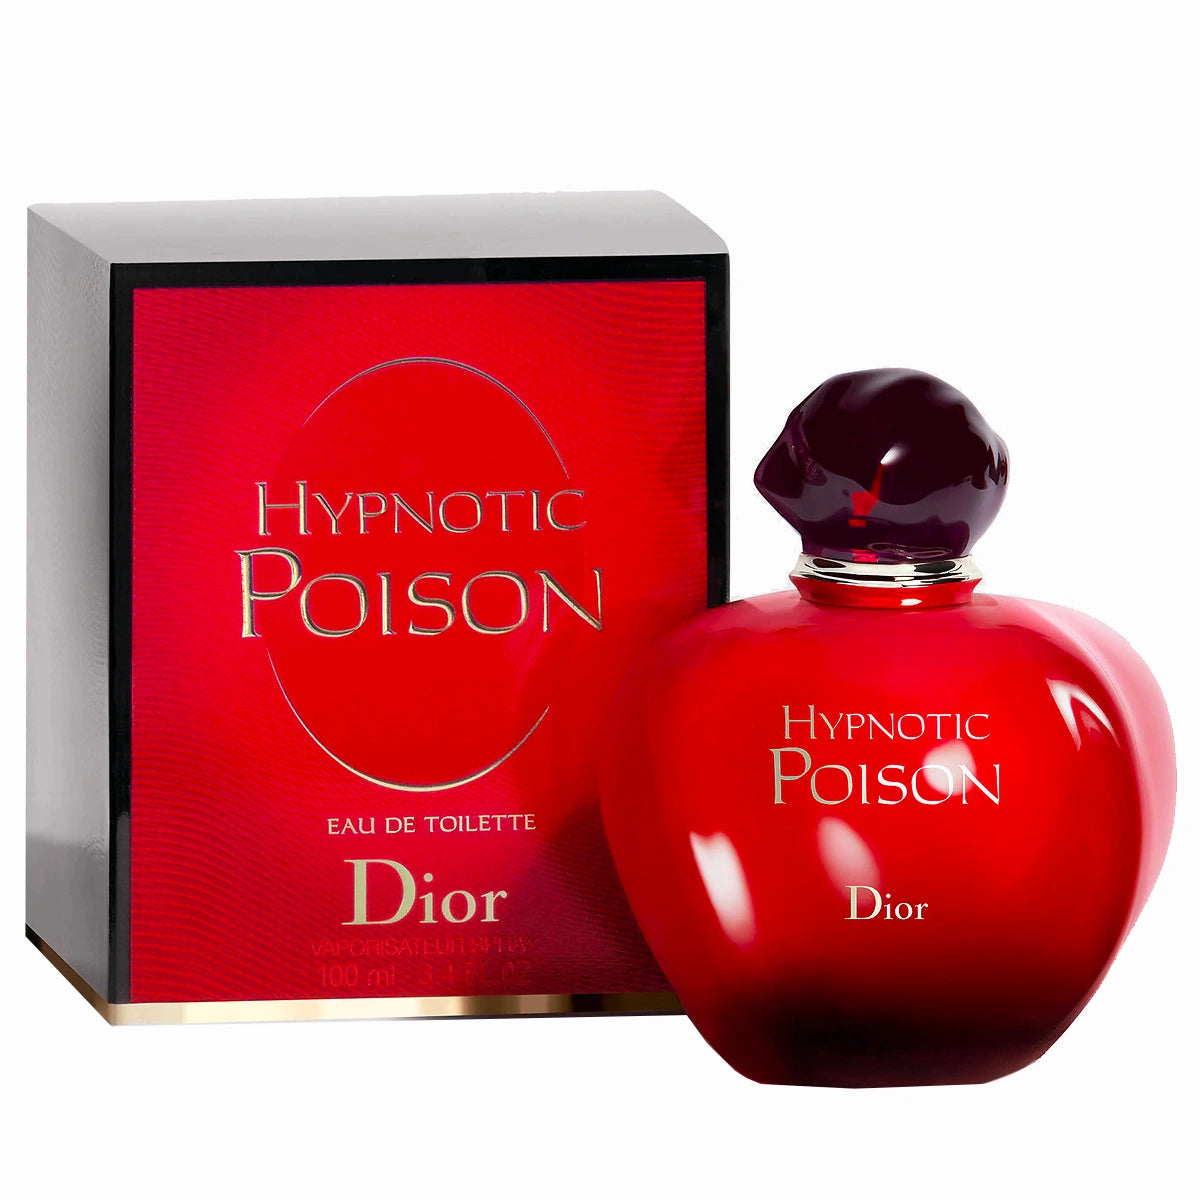 <span data-mce-fragment="1">The Hypnotic Poison Eau de Toilette has four contrasting facets: Intoxicating bitter almond and carvi, opulent sambac jasmine, mysterious jacaranda, and sensuous vanilla and musk all make for a compelling, bewitching fragrance fusion. The mystery of Dior's legendary forbidden fruit lives on in a magical, modern philter.</span>